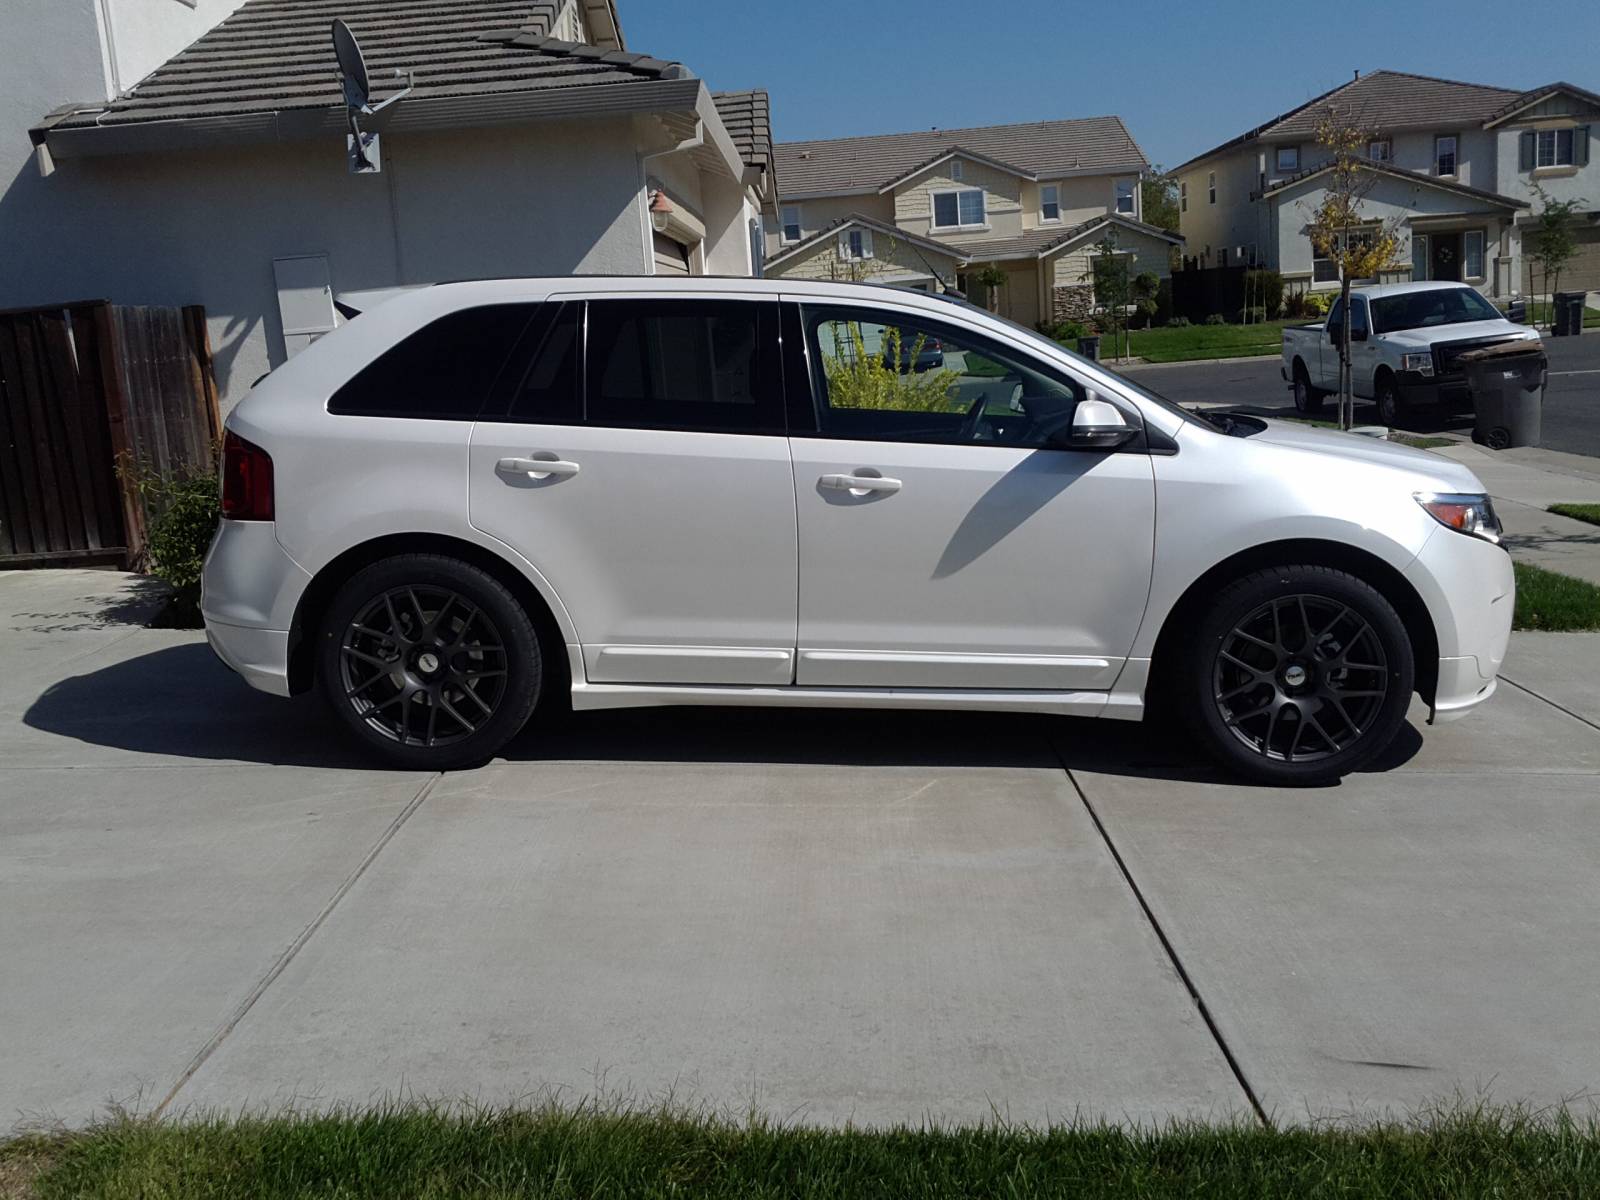 2012 Ford edge owners forum #7